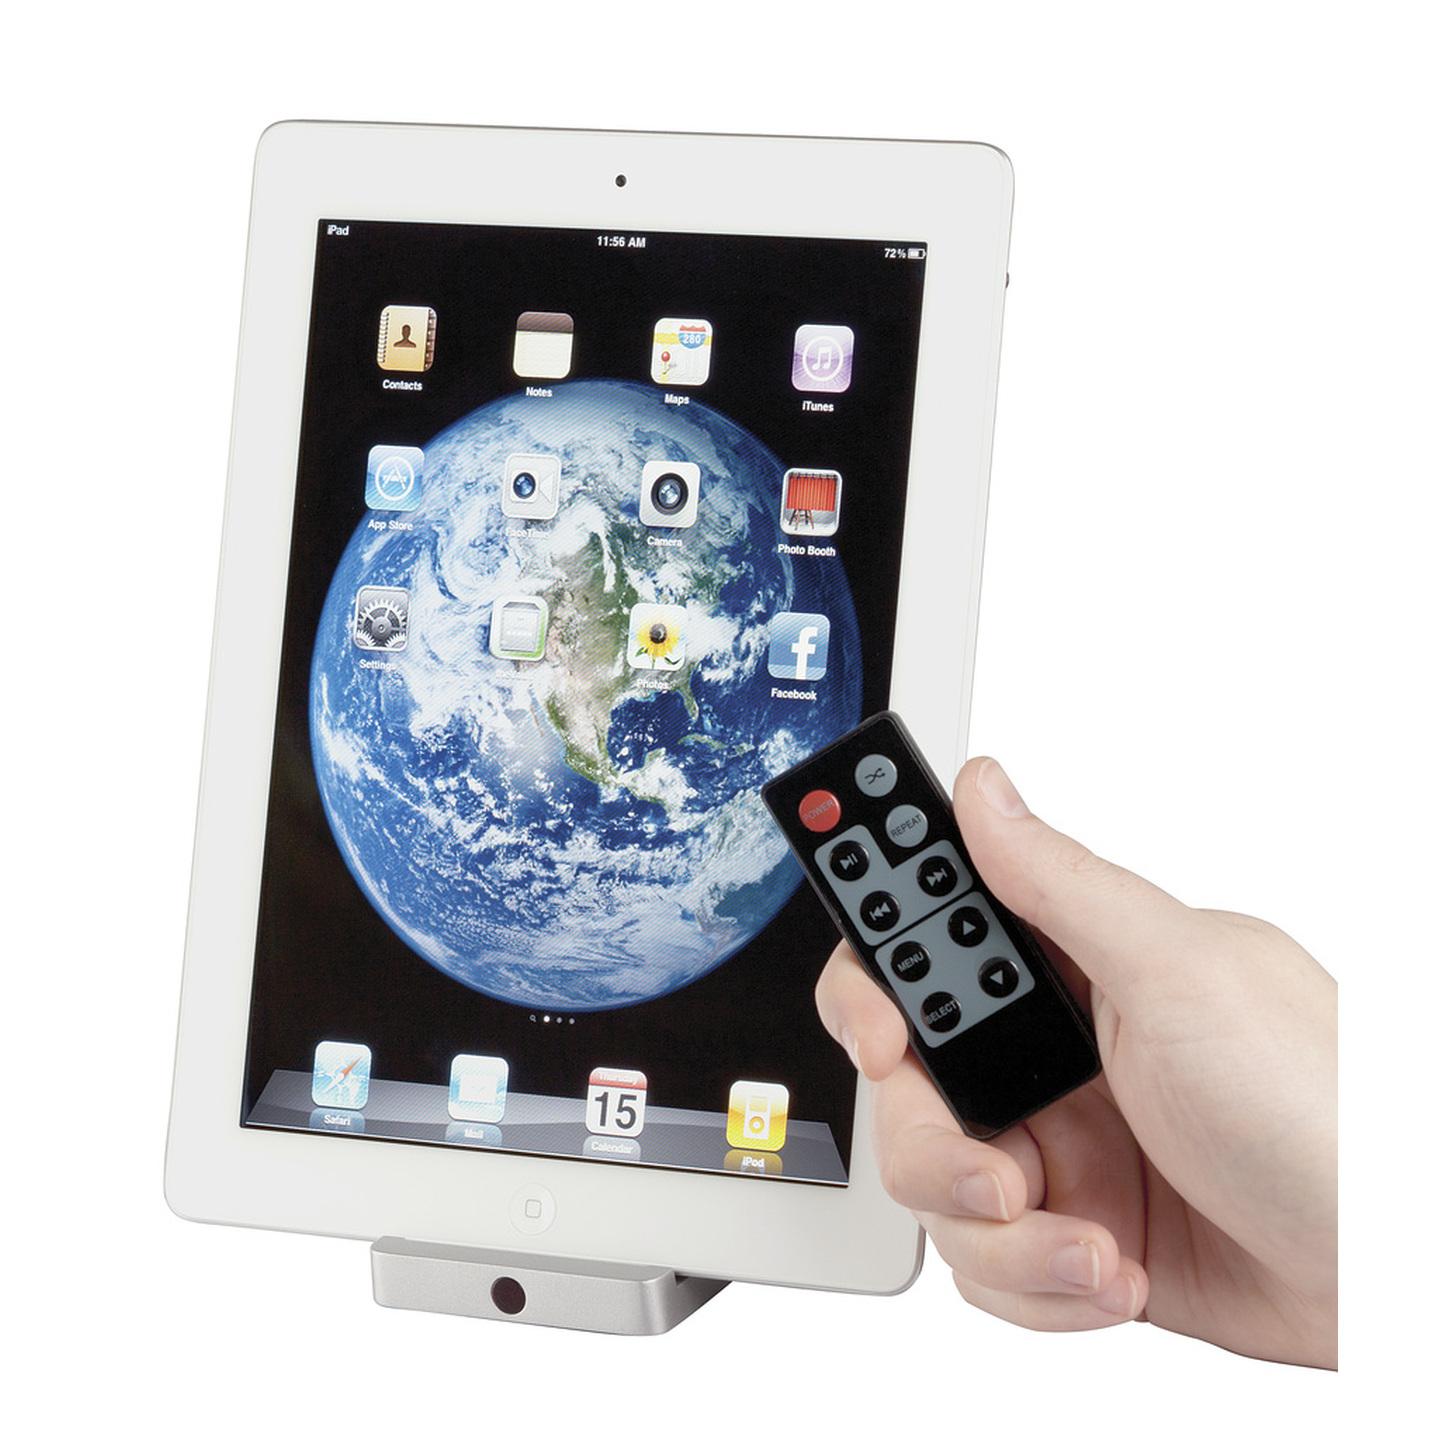 HDMI Docking Station for iPad/iPhone/iPod with Remote